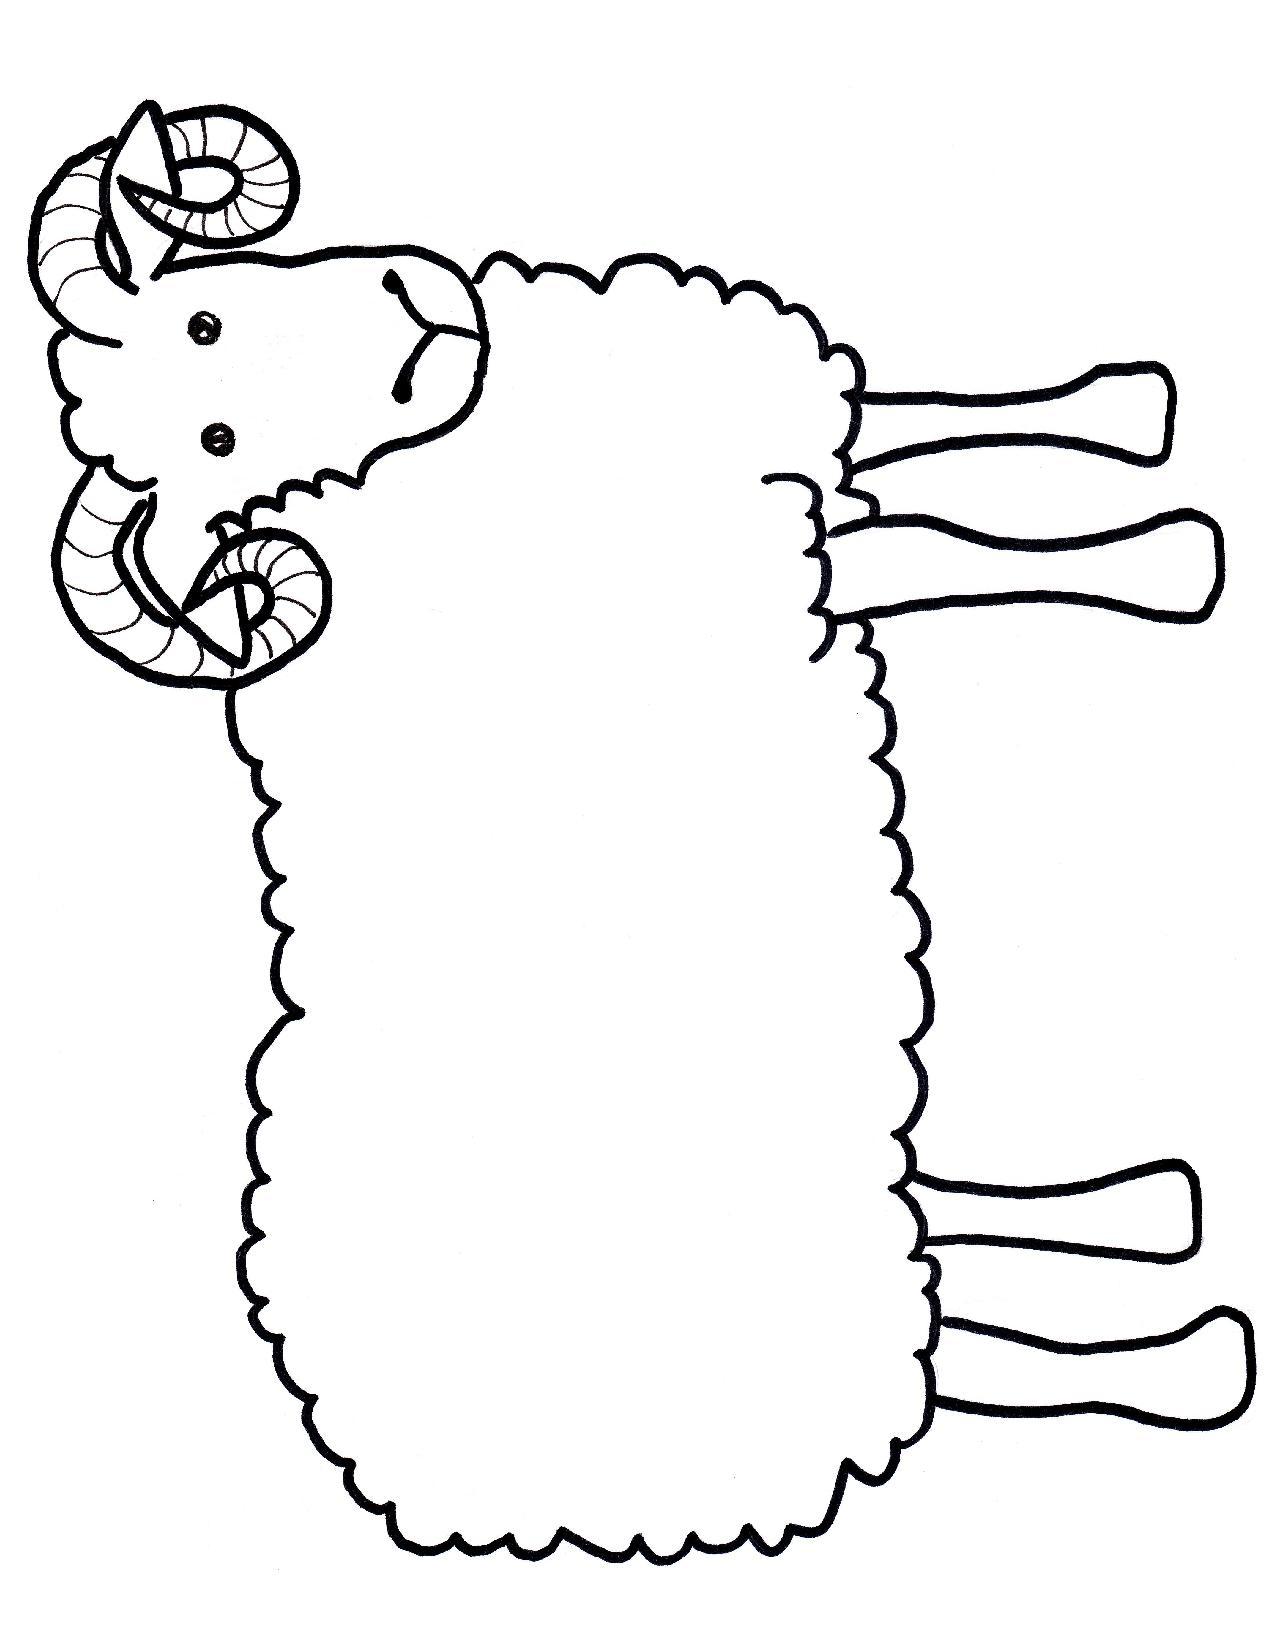 Sheep Printable | Jos Gandos Coloring Pages For Kids